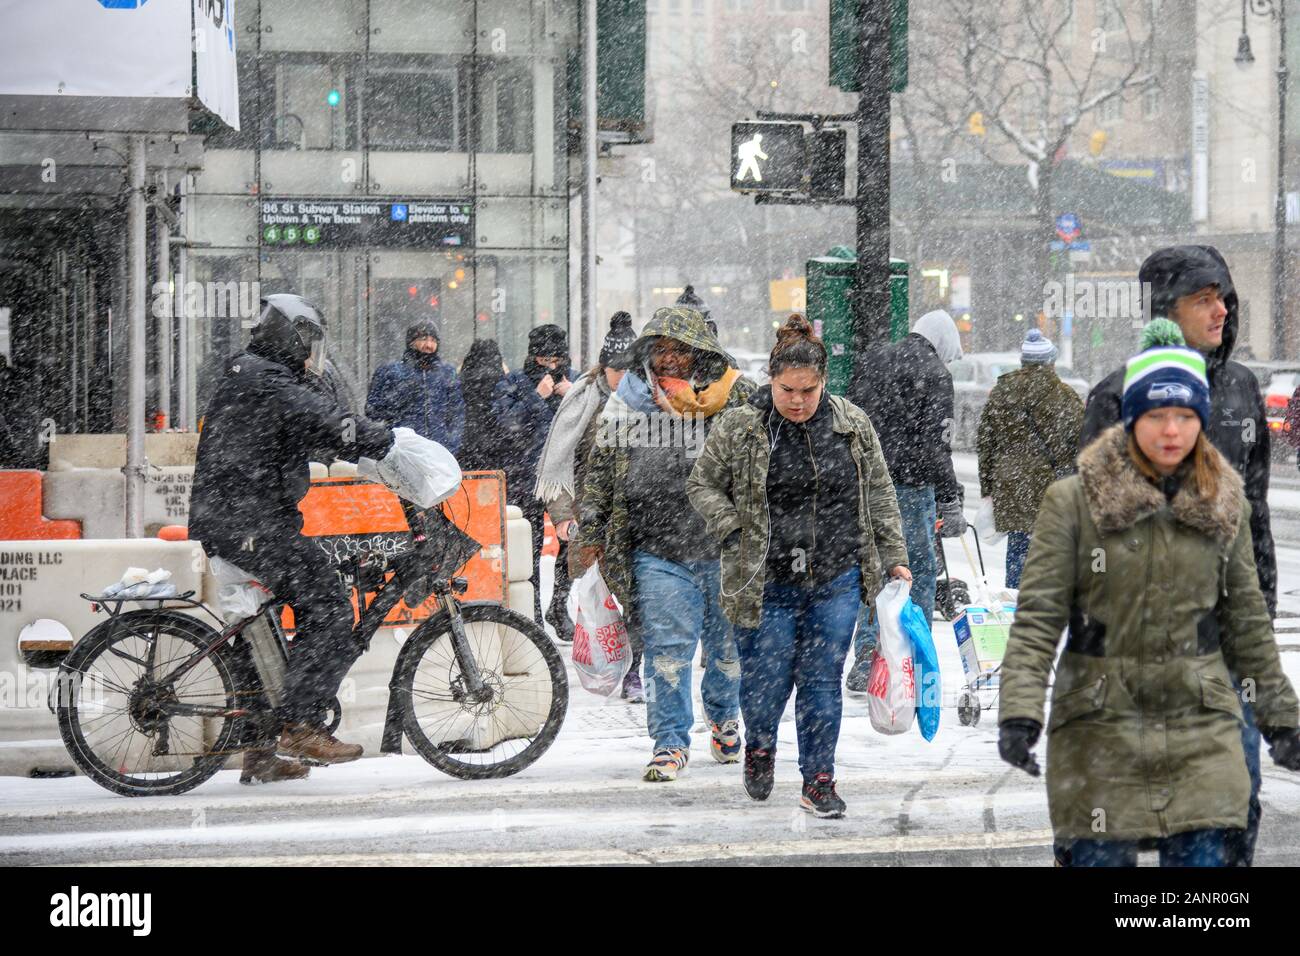 New York, USA,  18 January 2020.  People cross Lexington Avenue in New York City's Upper East Side during a snowstorm.   Credit: Enrique Shore/Alamy Live News Stock Photo